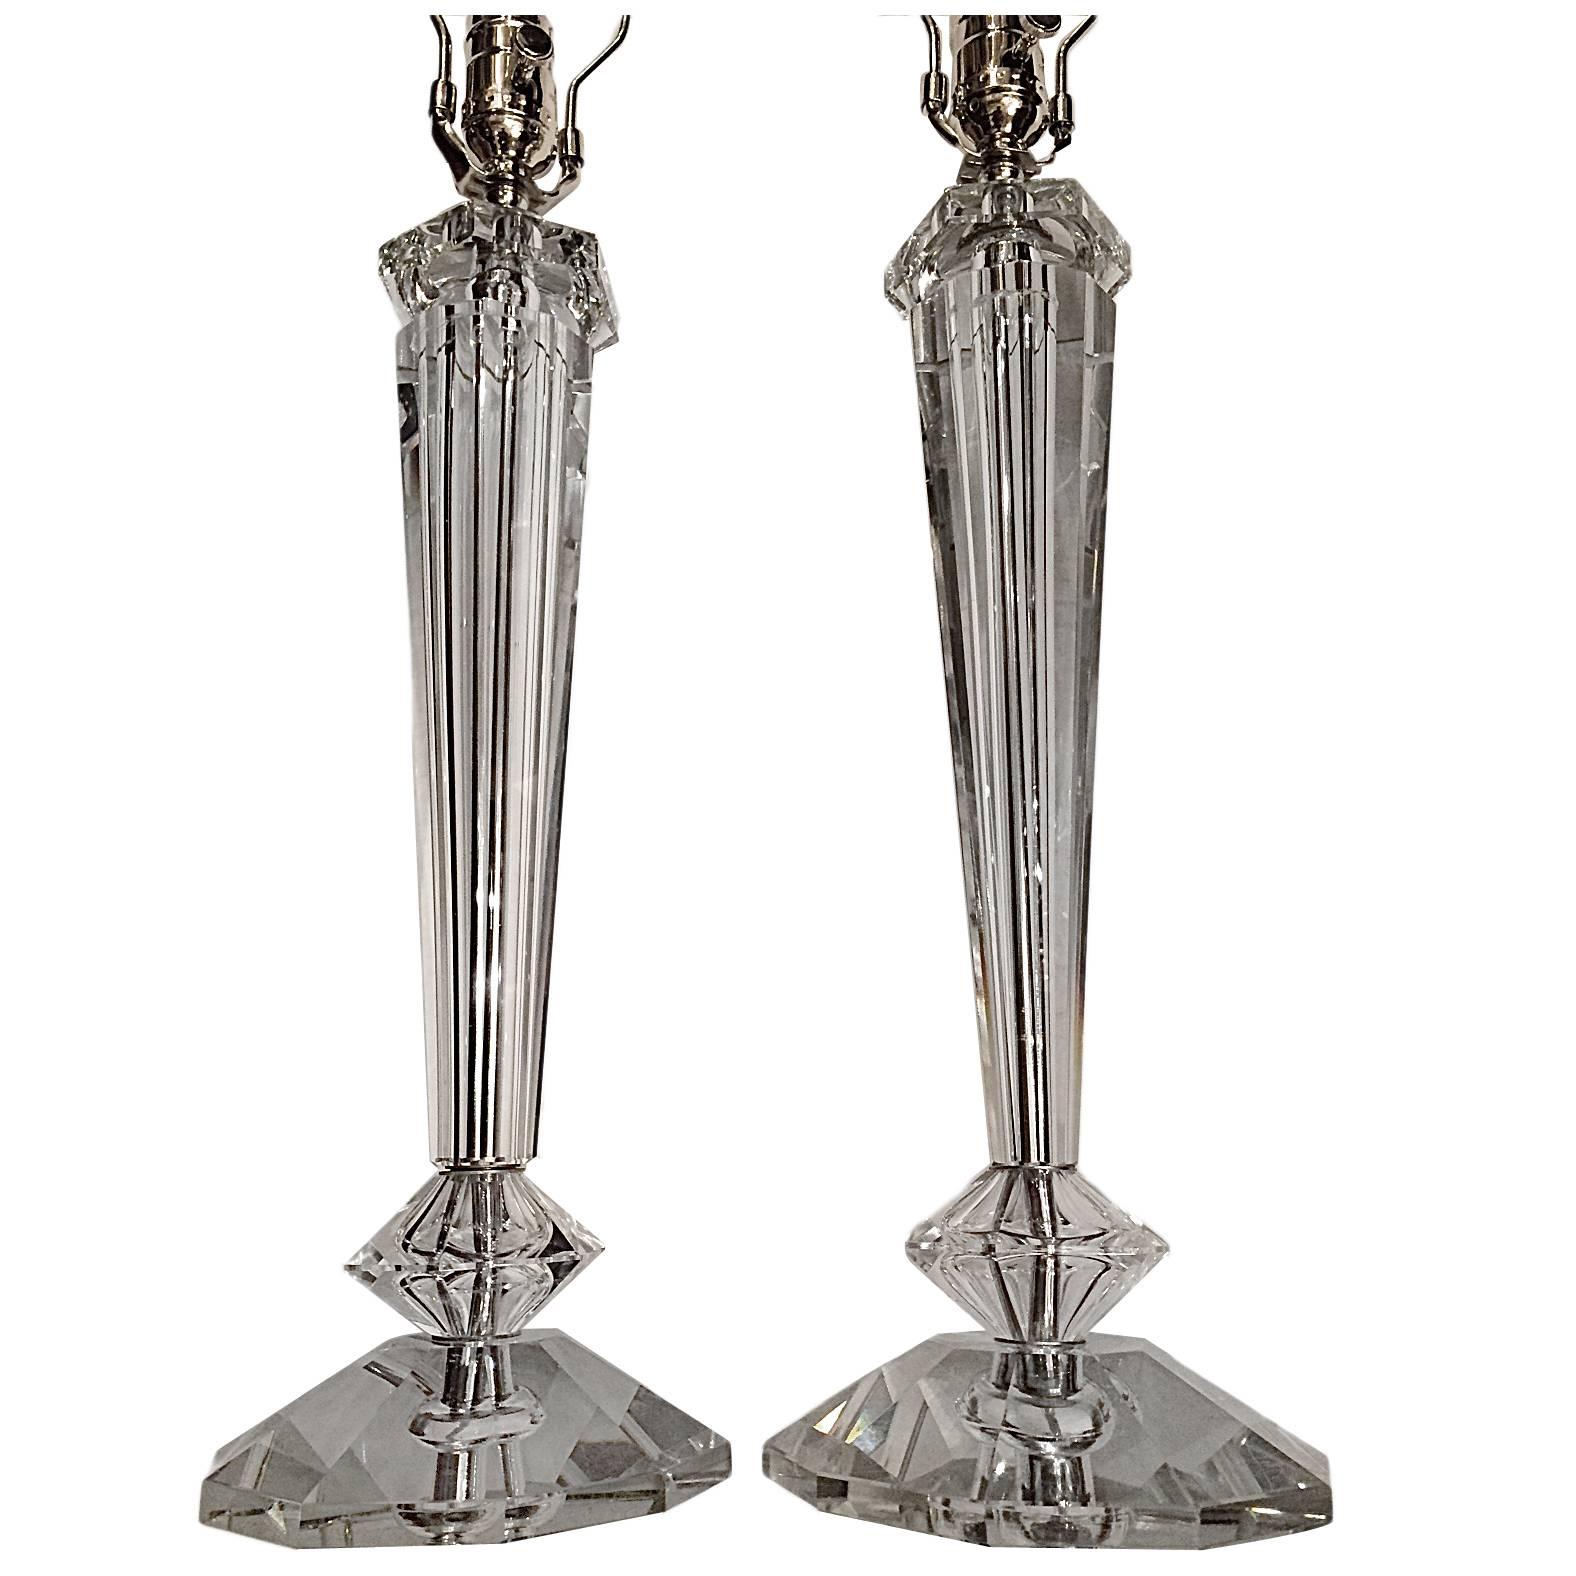 Pair of Cut-Glass Table Lamps